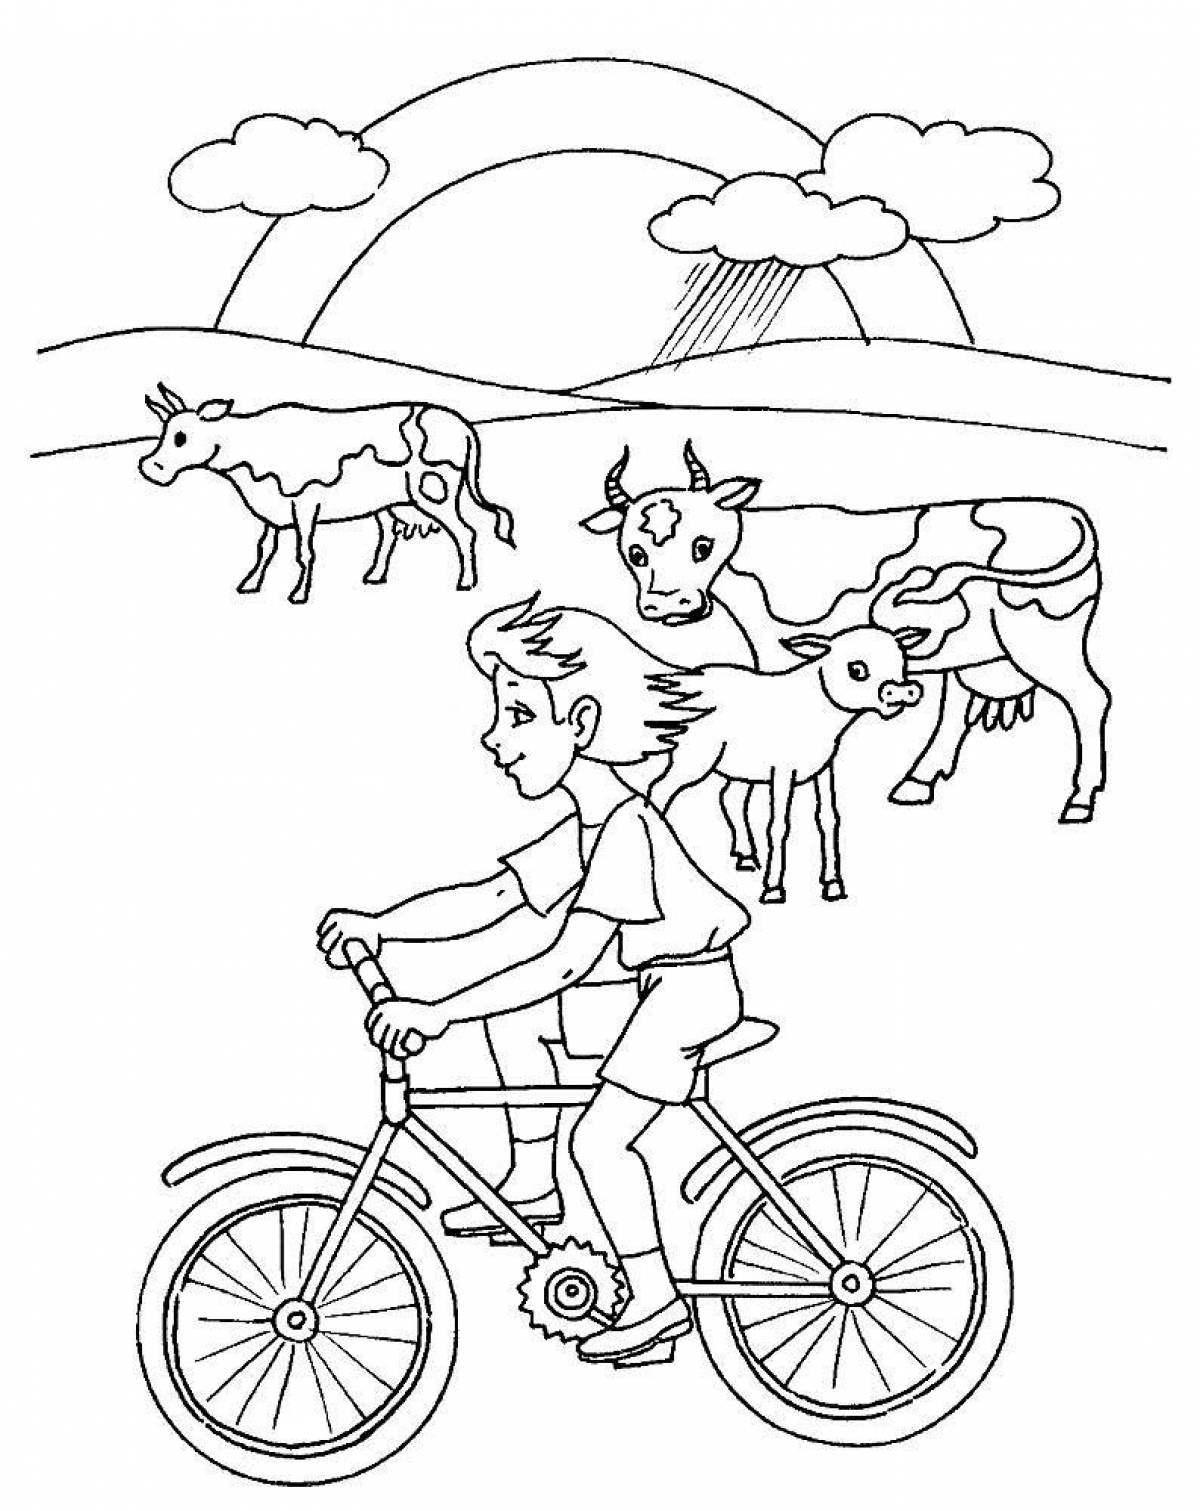 Wednesday live coloring page